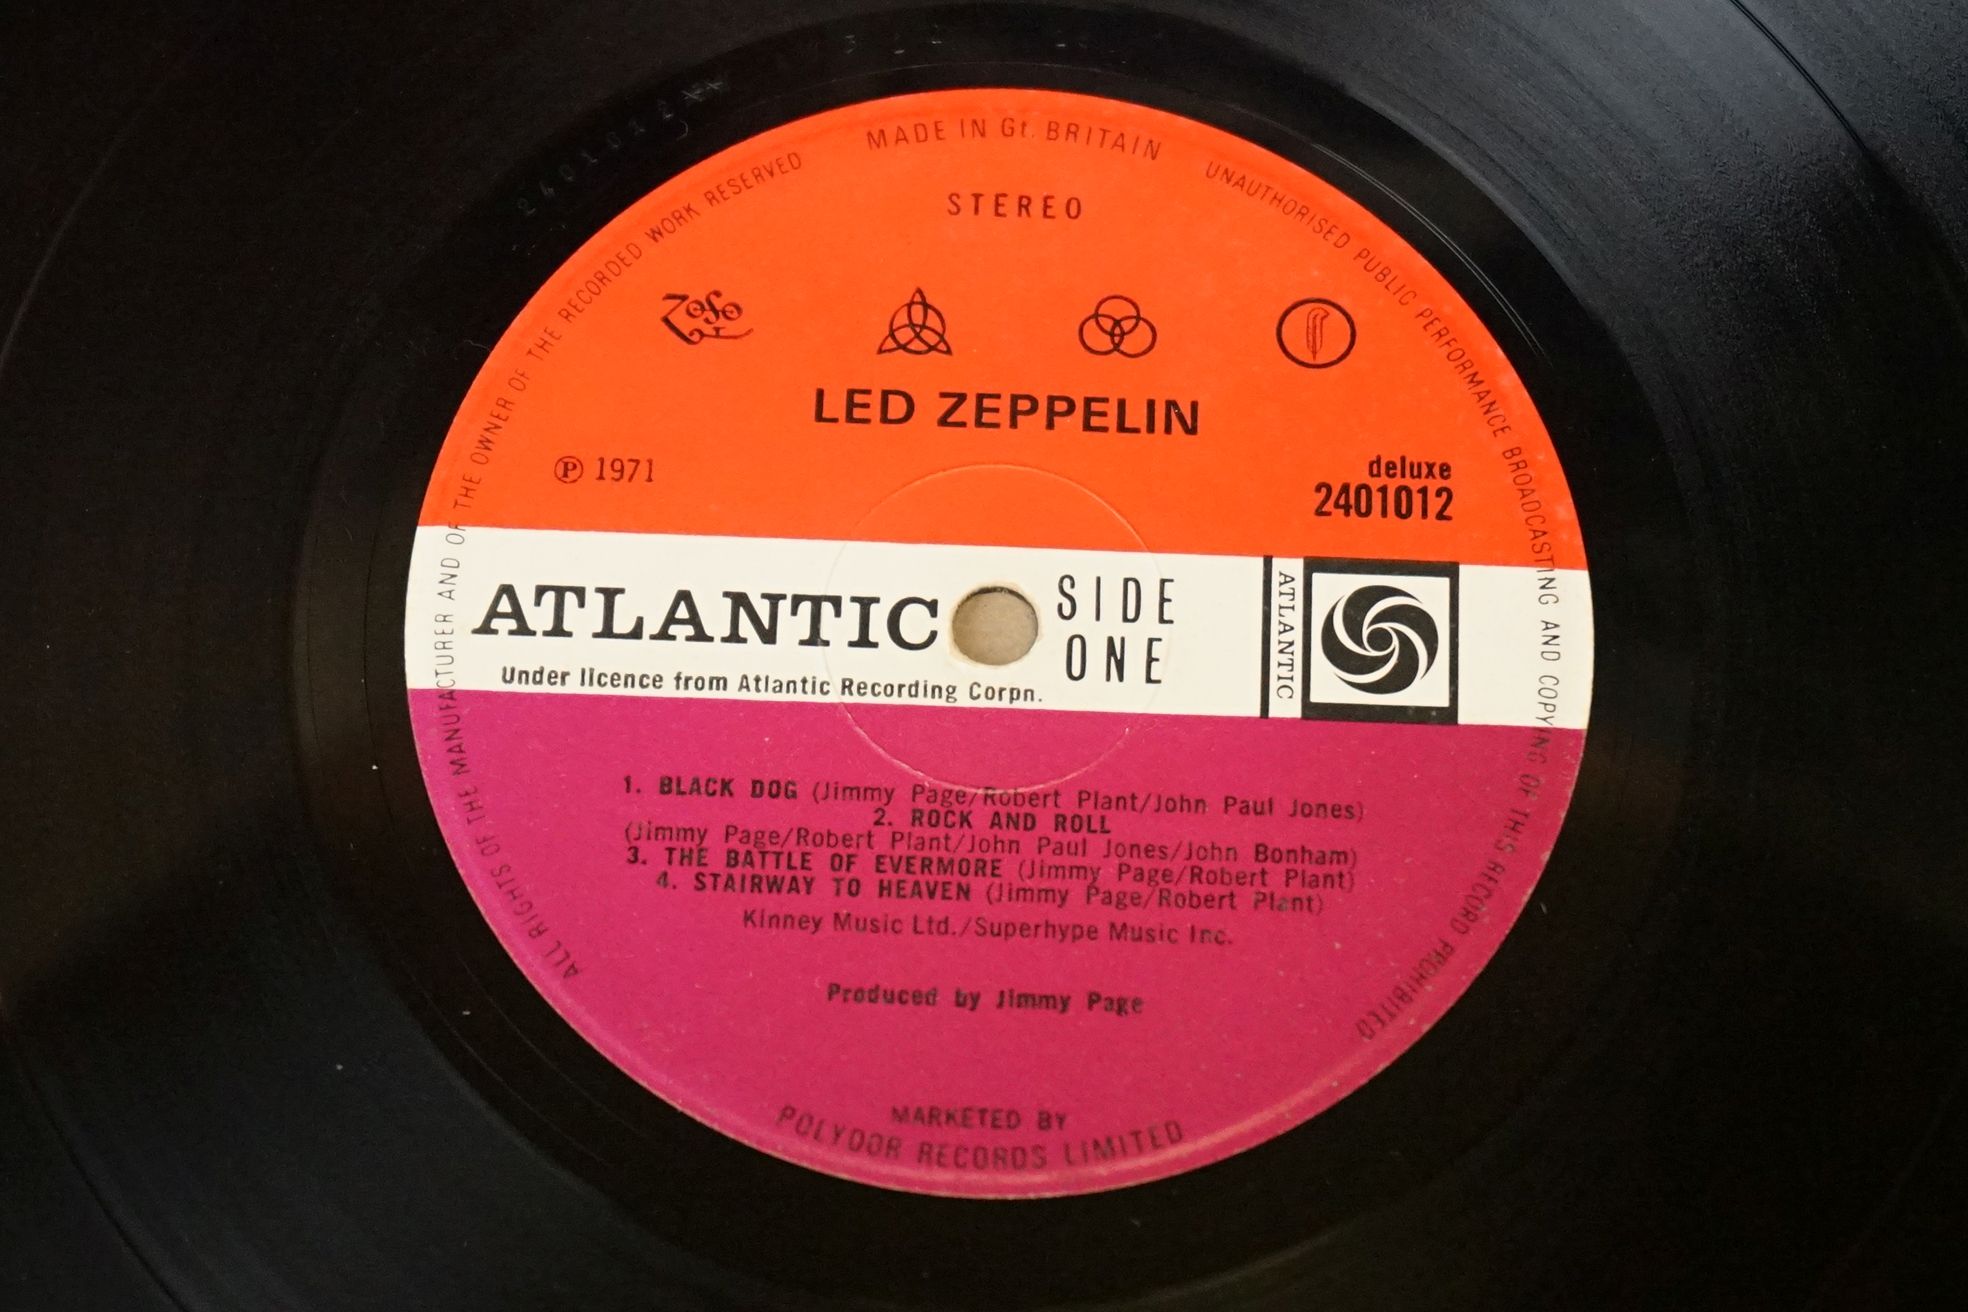 Vinyl - 3 Led Zeppelin LPs to include One (588171) Warner Bros / Arts / Jewel Music publishing - Image 12 of 14